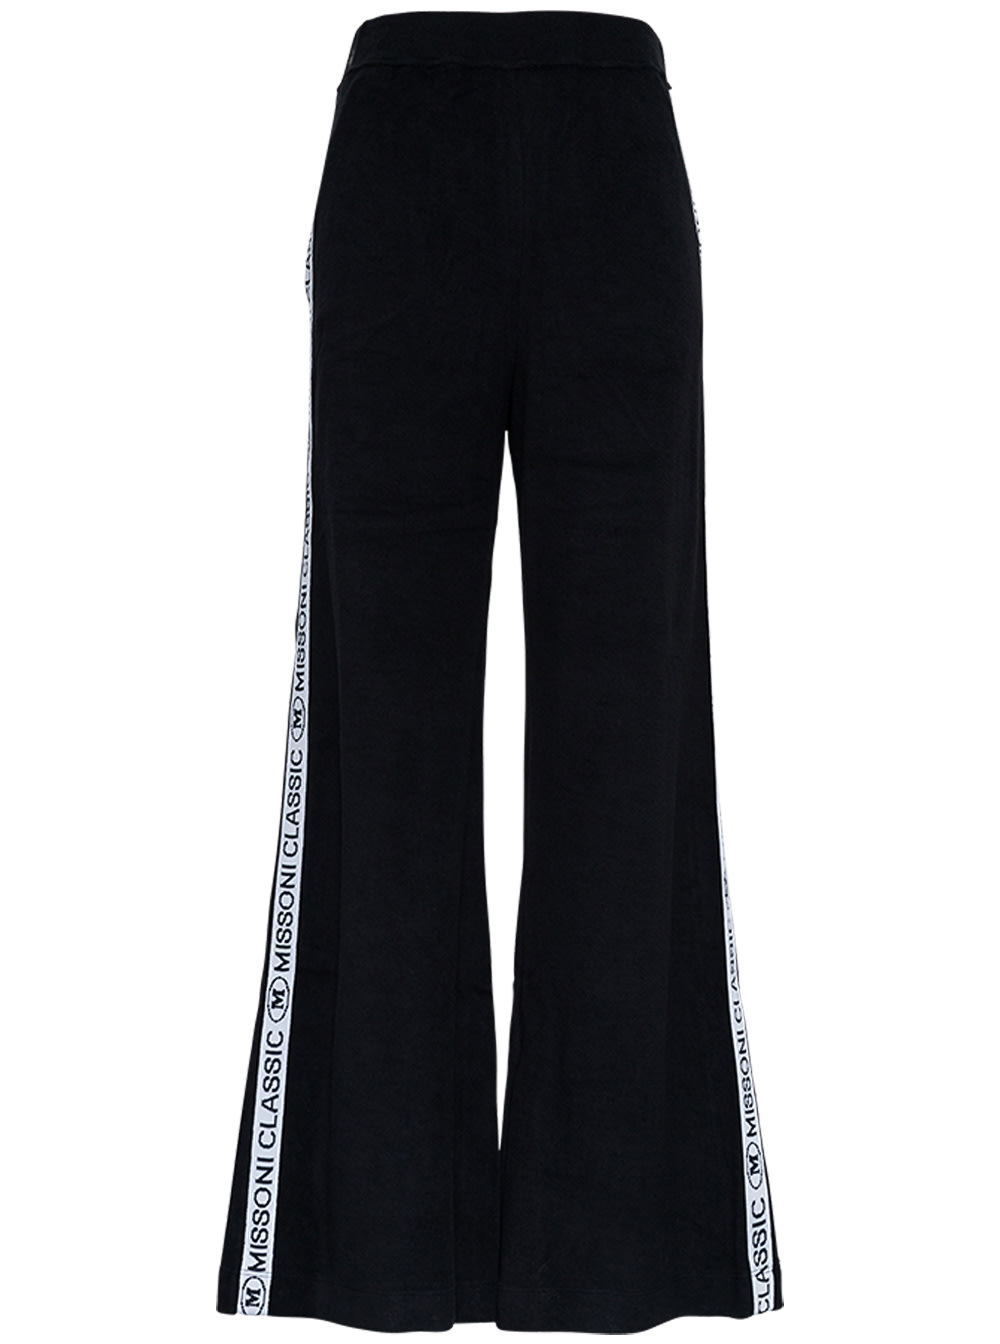 M Missoni Black Flared Cotton Pants With Side Logo Band